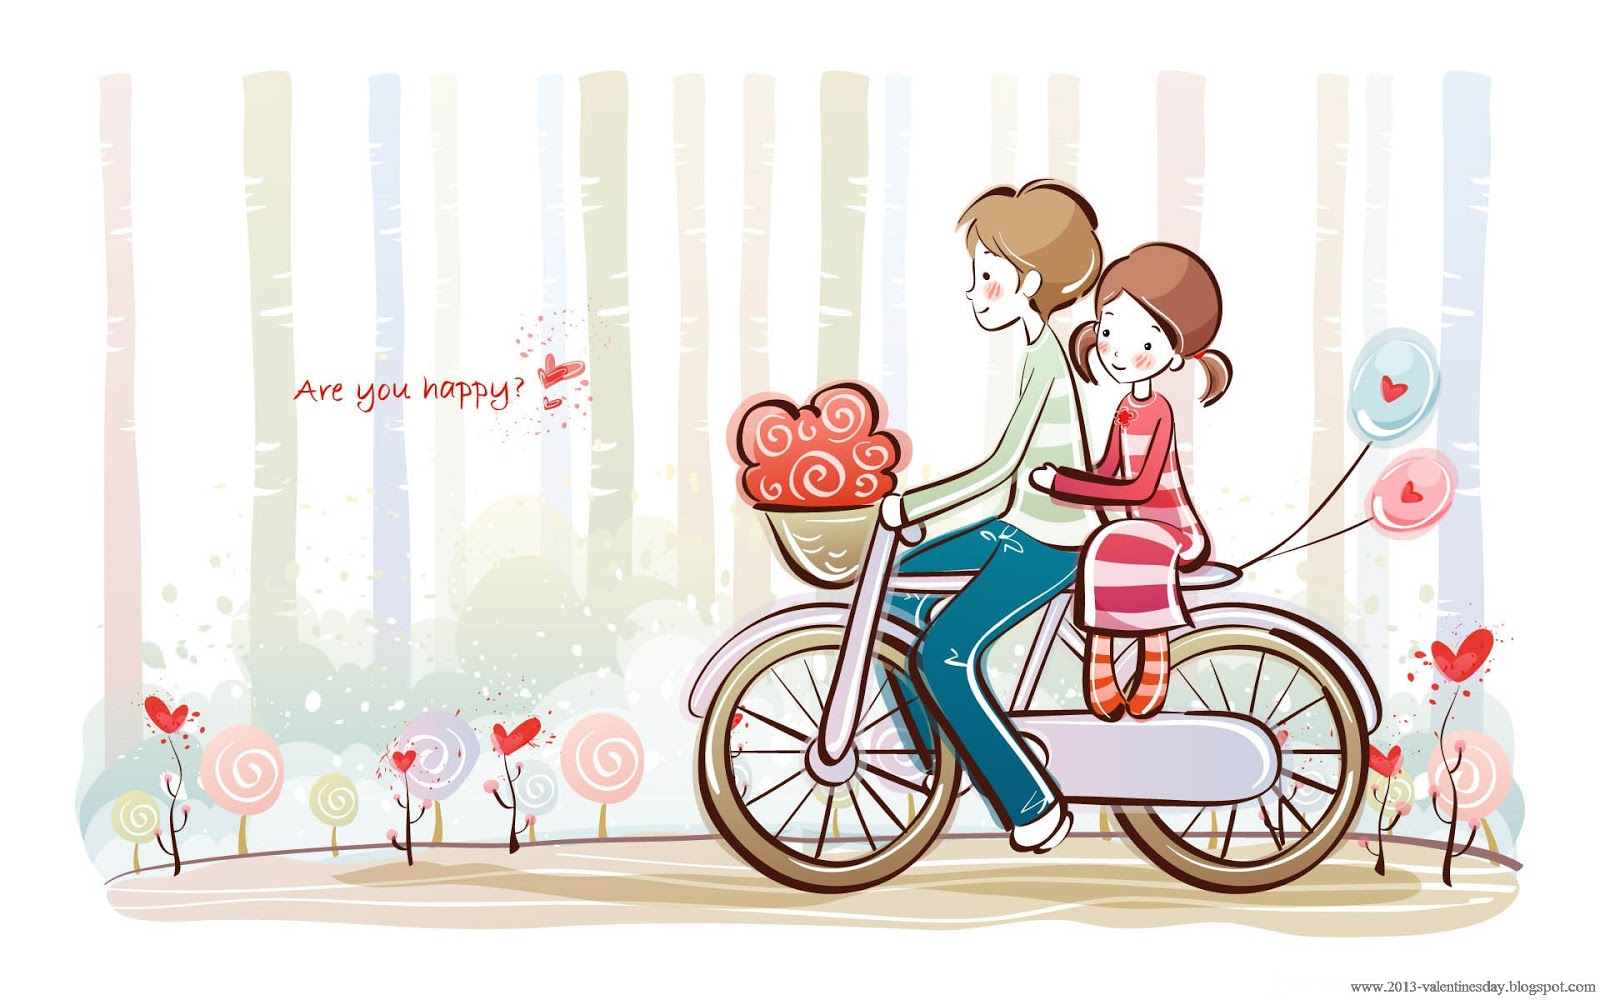 Love Couple Cartoon Images HD Wallpaper - Extreme Wallpapers